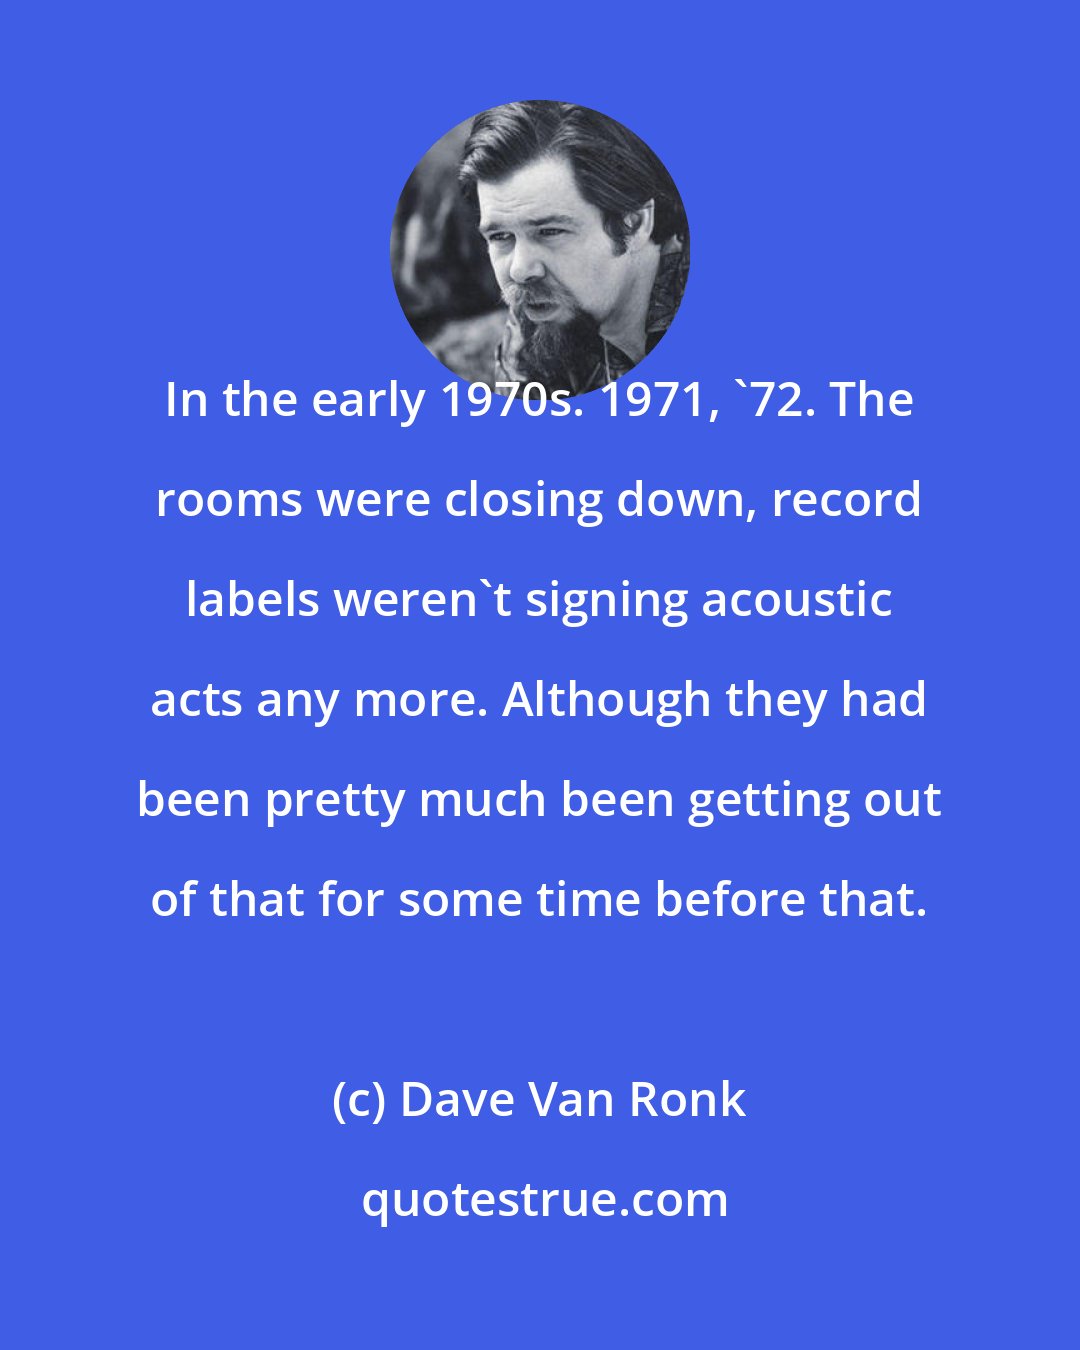 Dave Van Ronk: In the early 1970s. 1971, '72. The rooms were closing down, record labels weren't signing acoustic acts any more. Although they had been pretty much been getting out of that for some time before that.